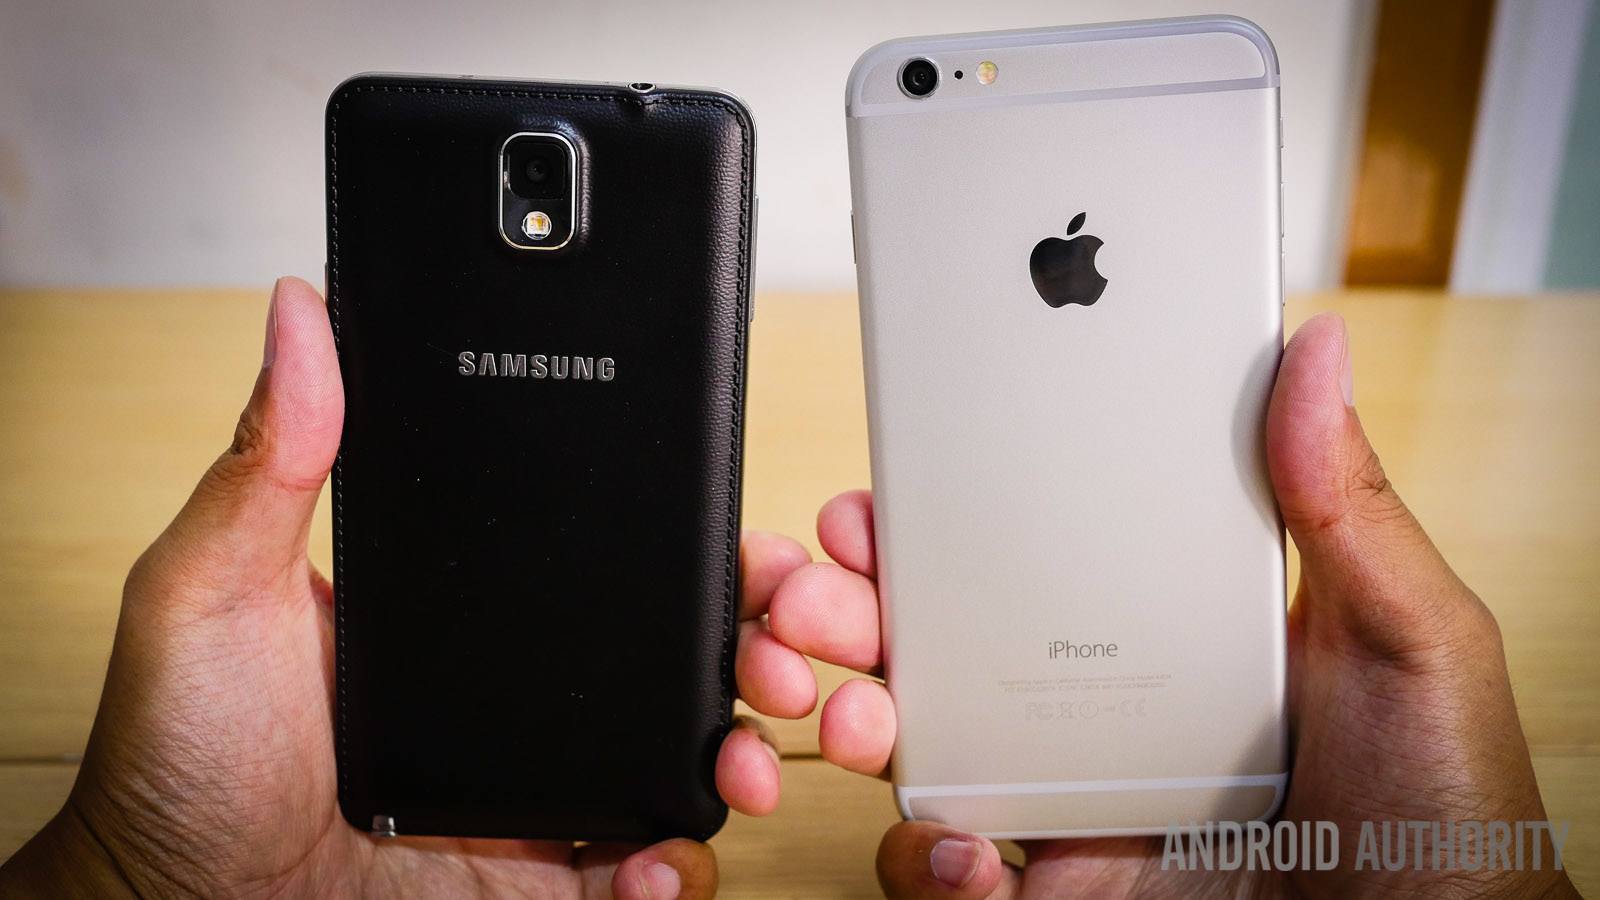 iphone 6 plus vs samsung galaxy note 3 quick look aa (10 of 20)